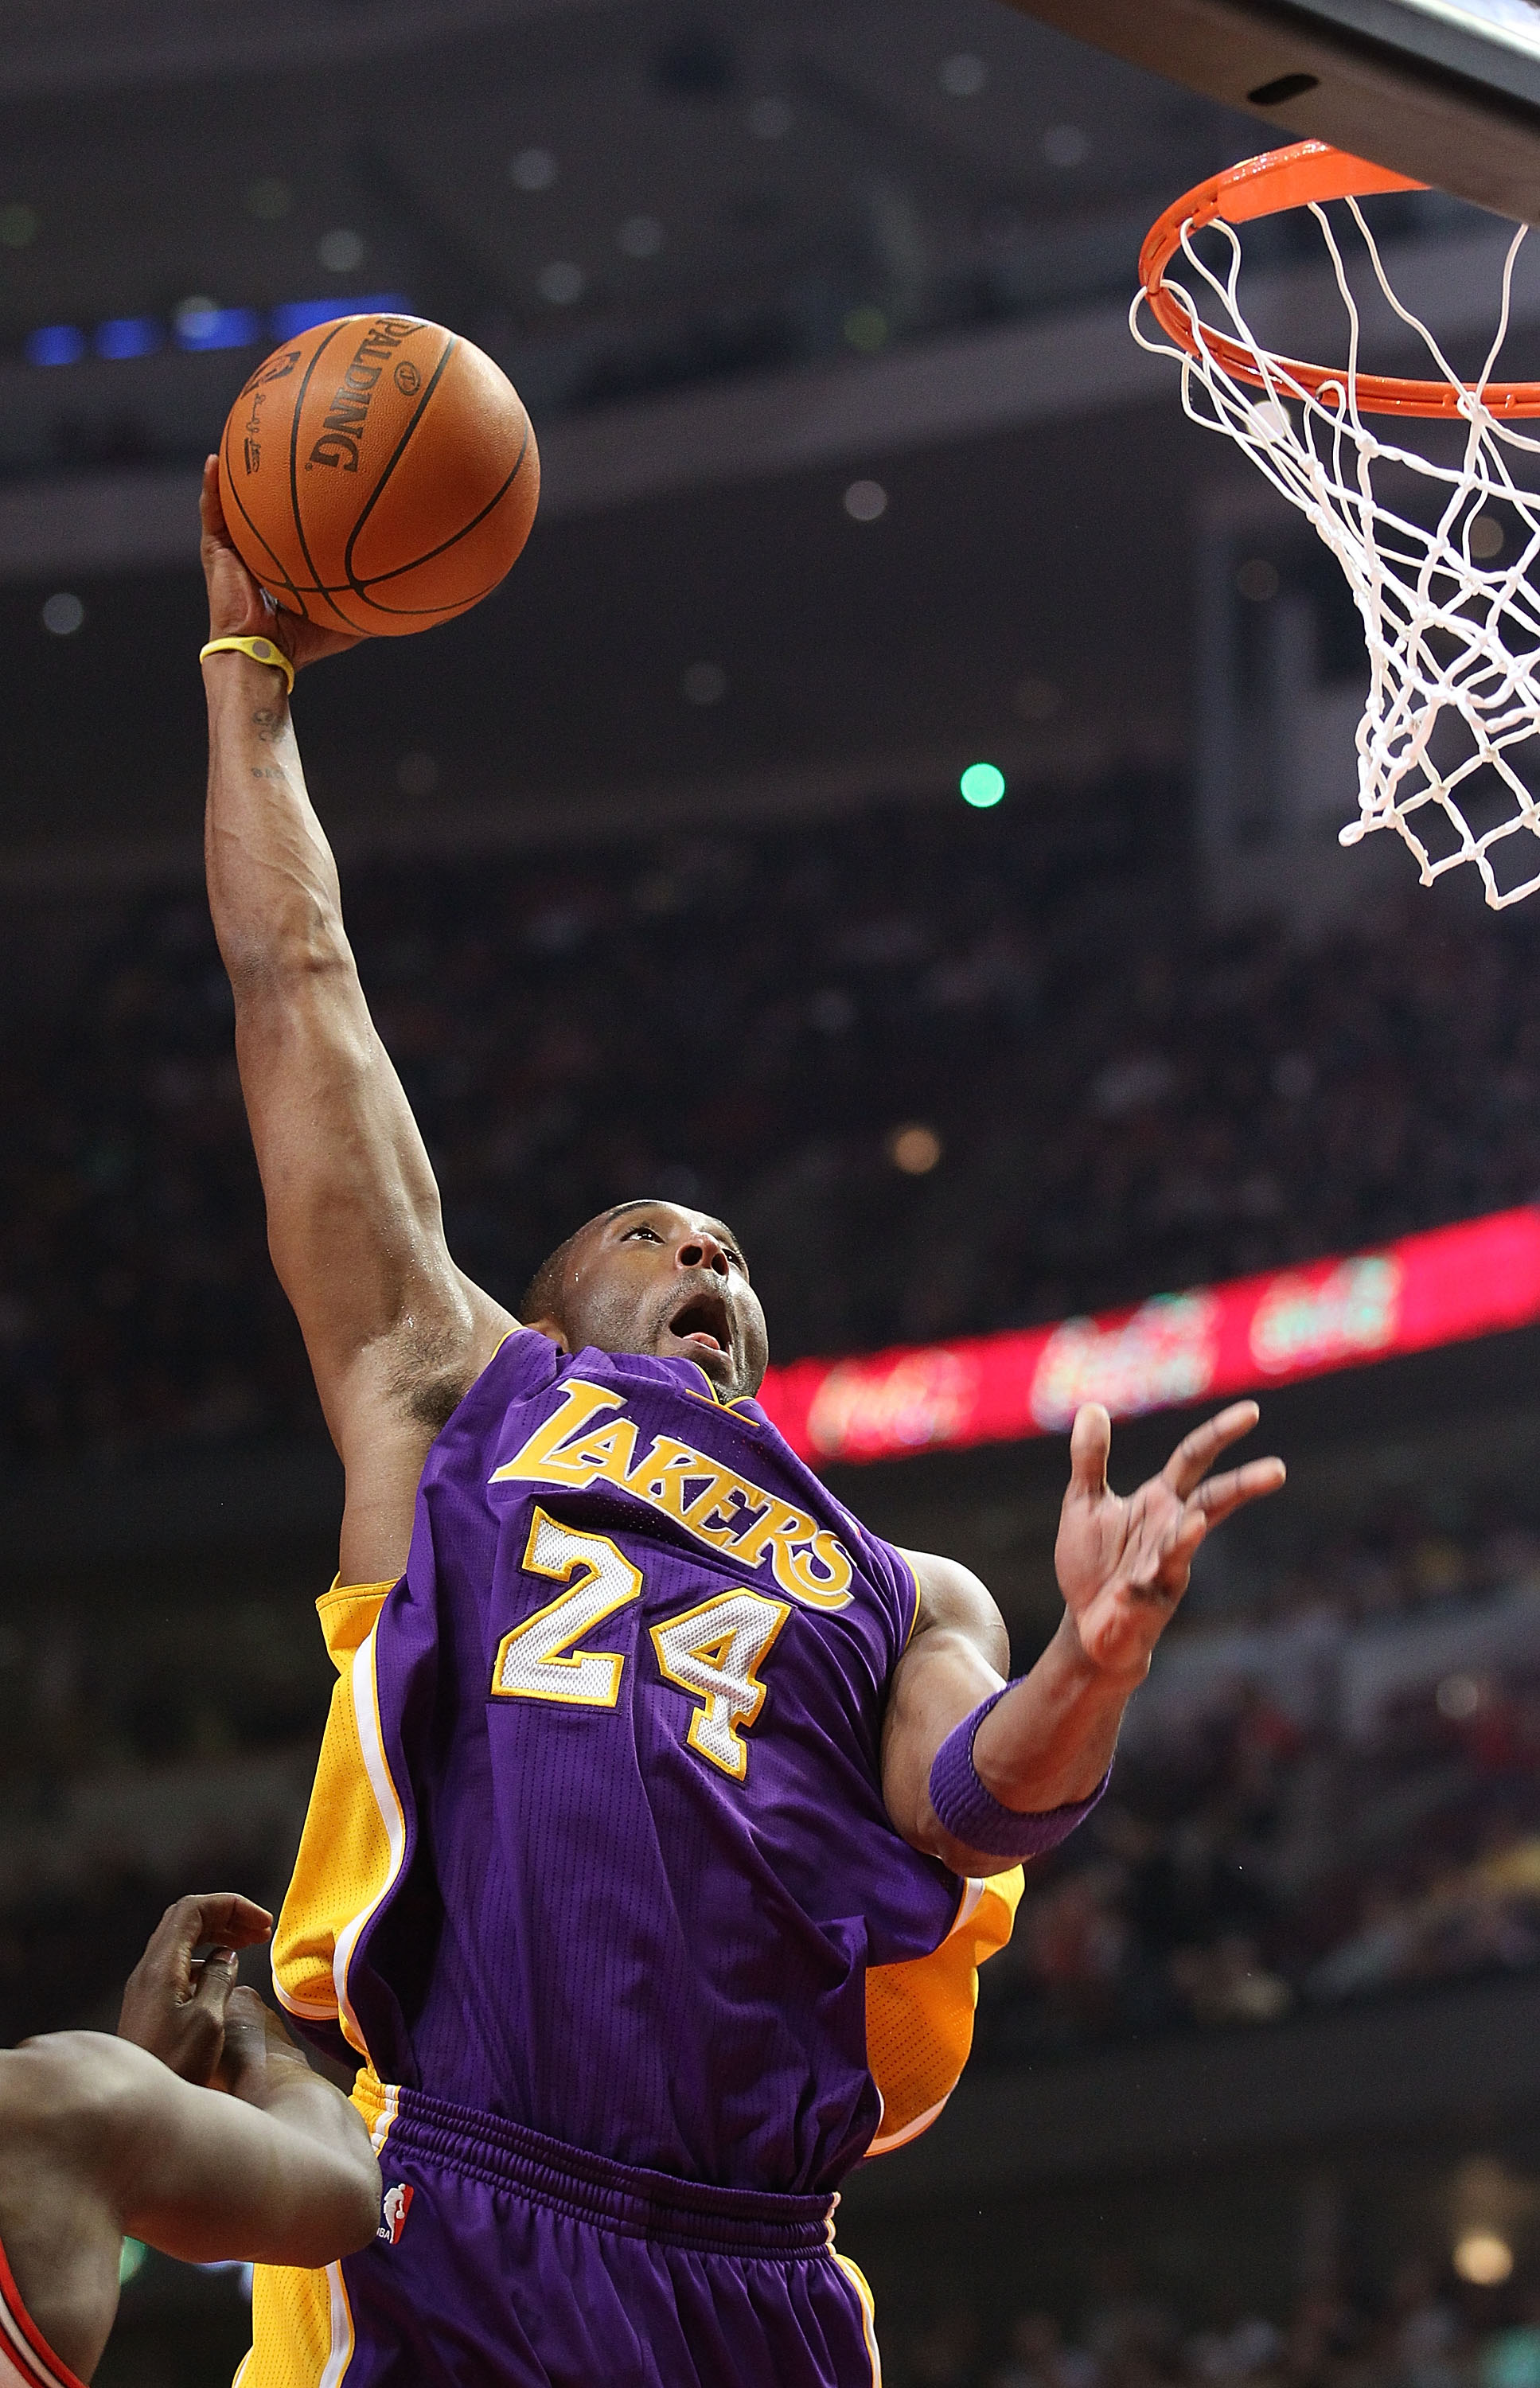 CHICAGO, IL - DECEMBER 10: Kobe Bryant #24 of the Los Angeles Lakers goes up for a dunk against the Chicago Bulls at the United Center on December 10, 2010 in Chicago, Illinois. NOTE TO USER: User expressly acknowledges and agrees that, by downloading and